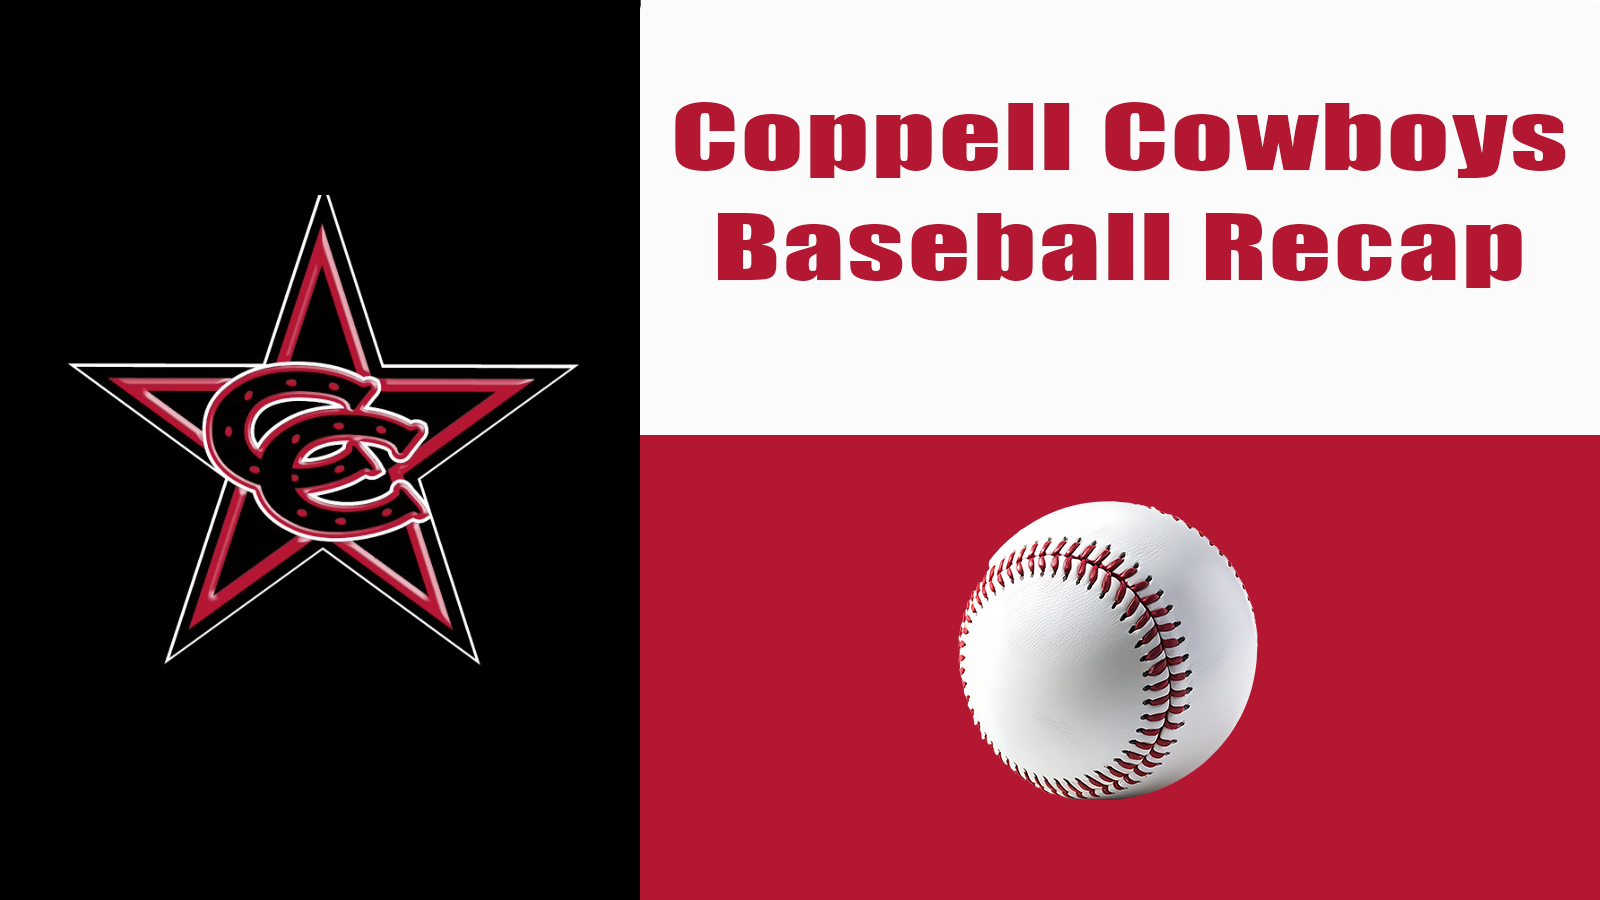 Coppell Cowboys Fall to Flower Mound Jaguars in District 6-6A Series